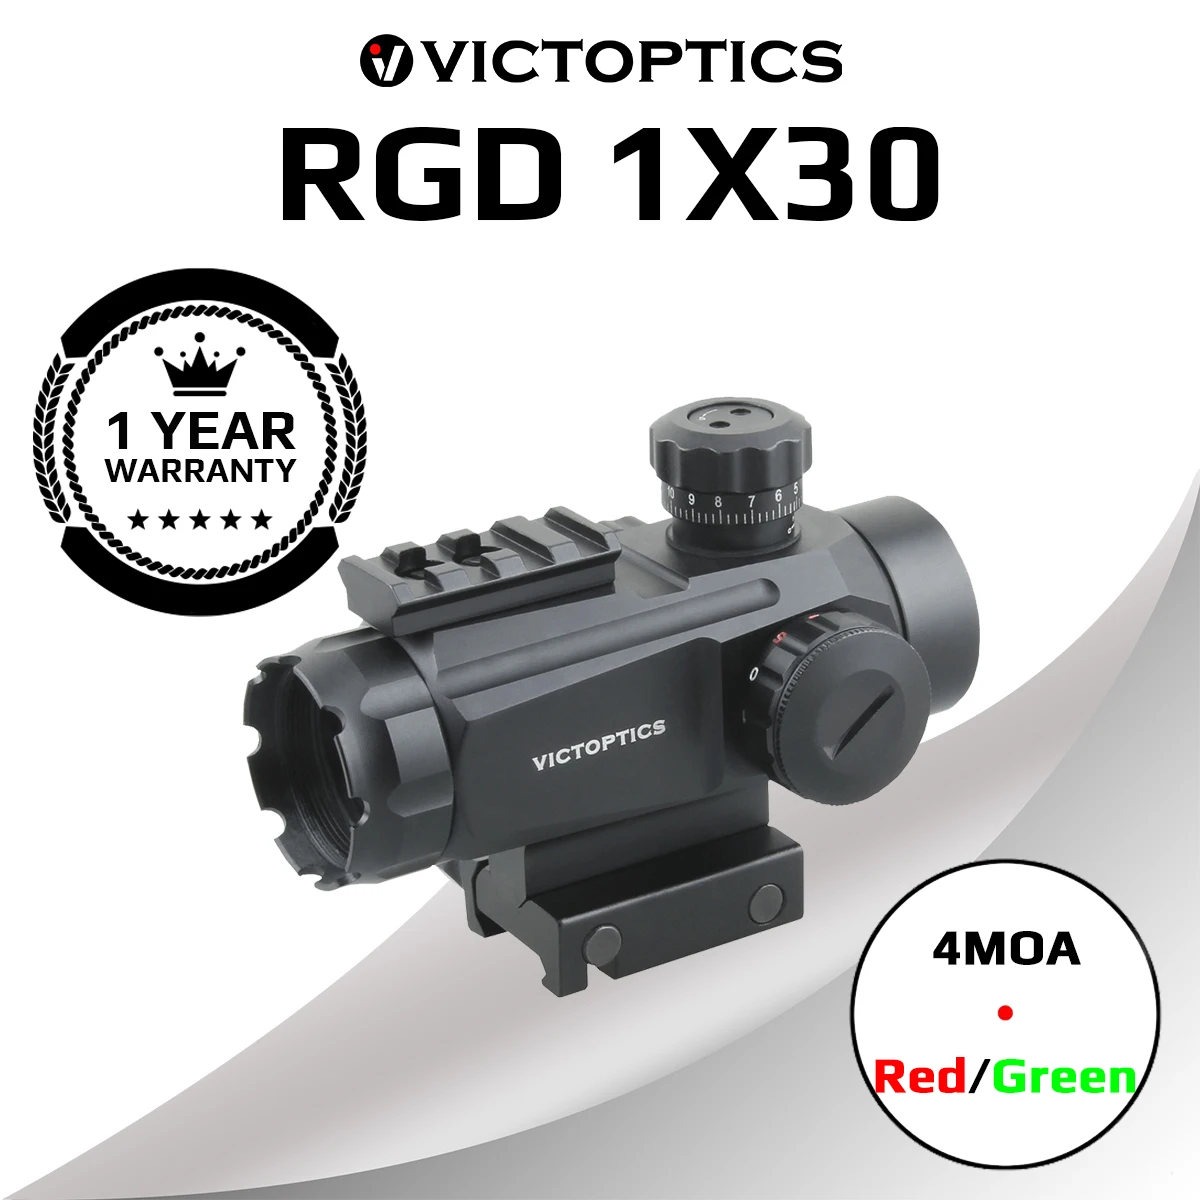 VictOptics RGD 1X30 Red Dot Sight 5 Levels 4MOA Red/Green Dot Designed For Real Fire Arms Airsoft Tactical Optics